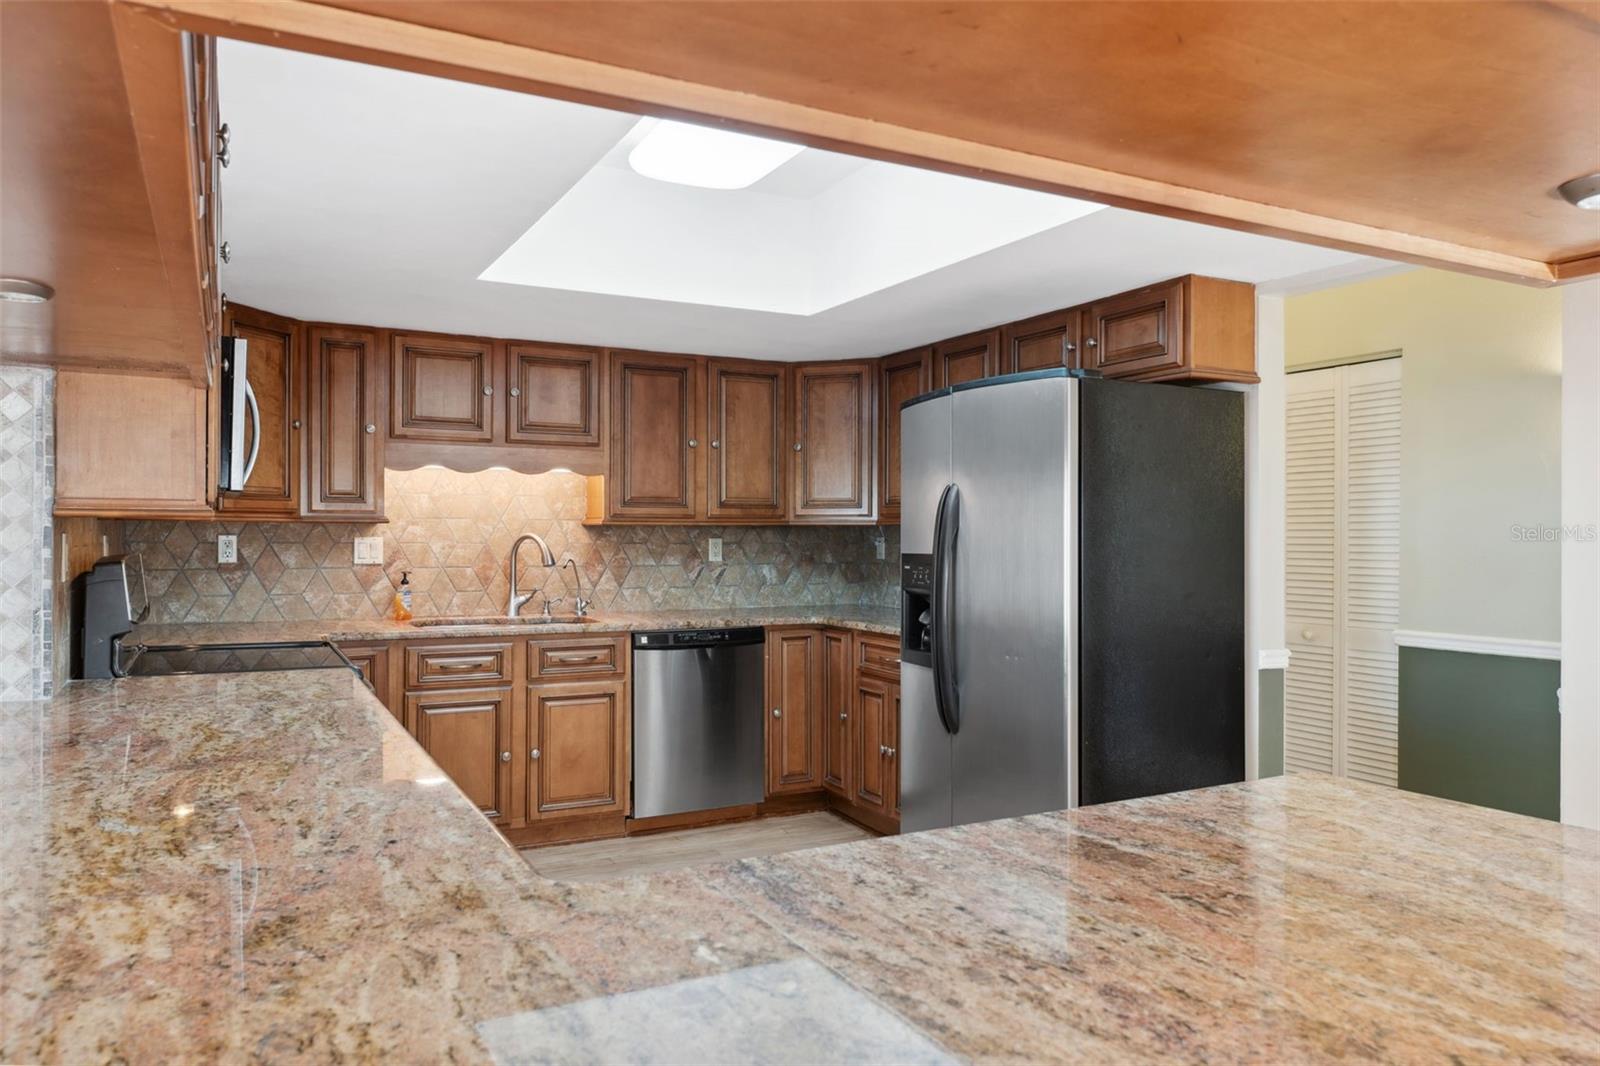 Gorgeous rich granite counters